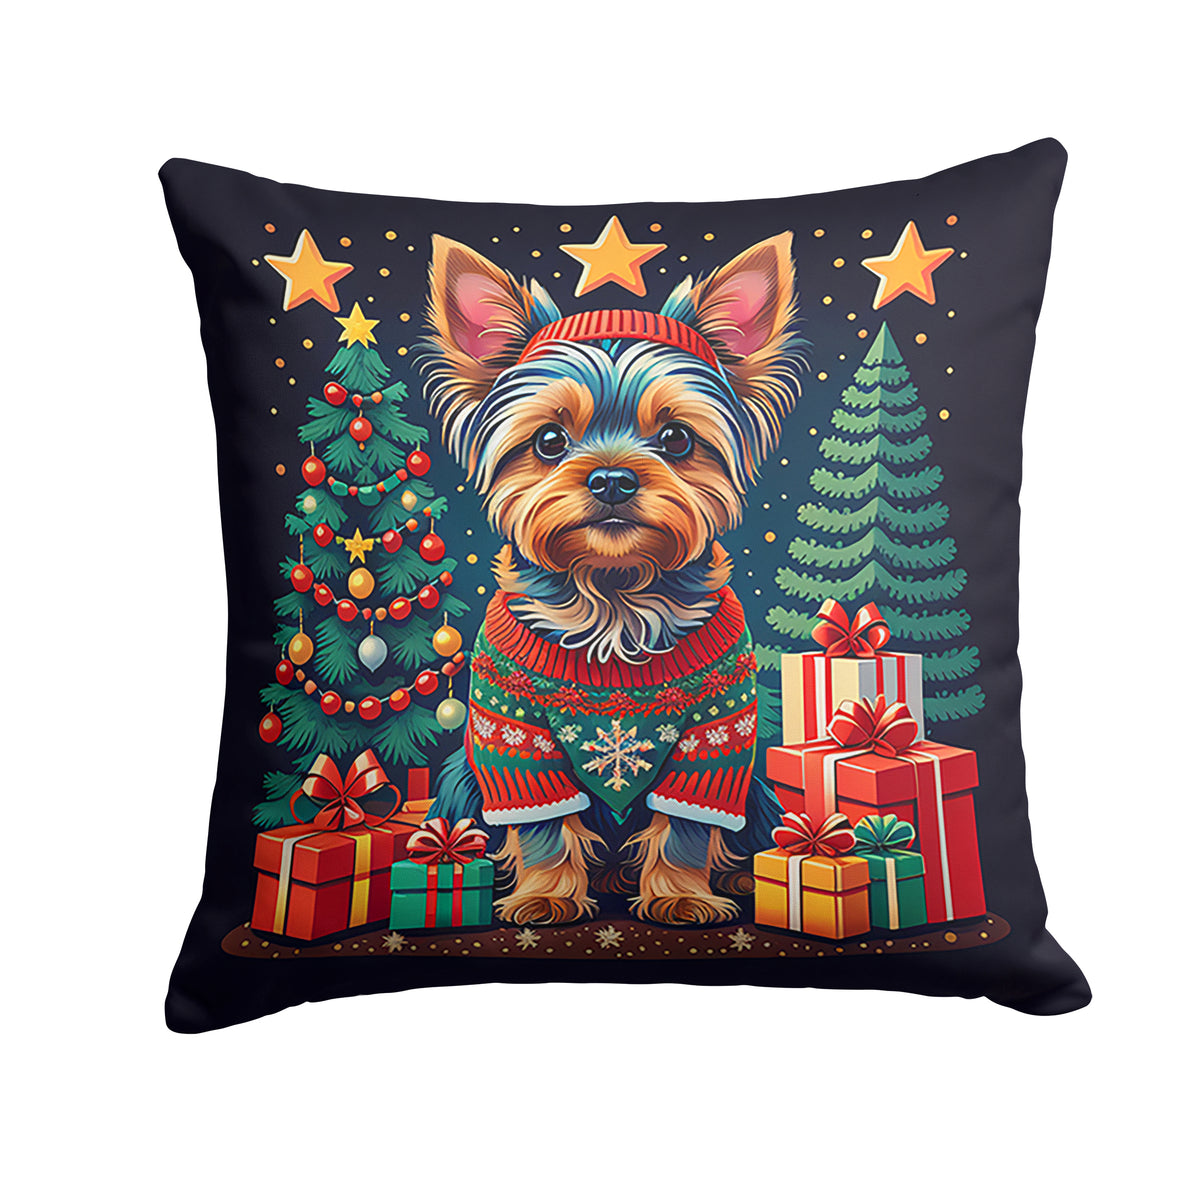 Buy this Yorkie Yorkshire Terrier Christmas Fabric Decorative Pillow